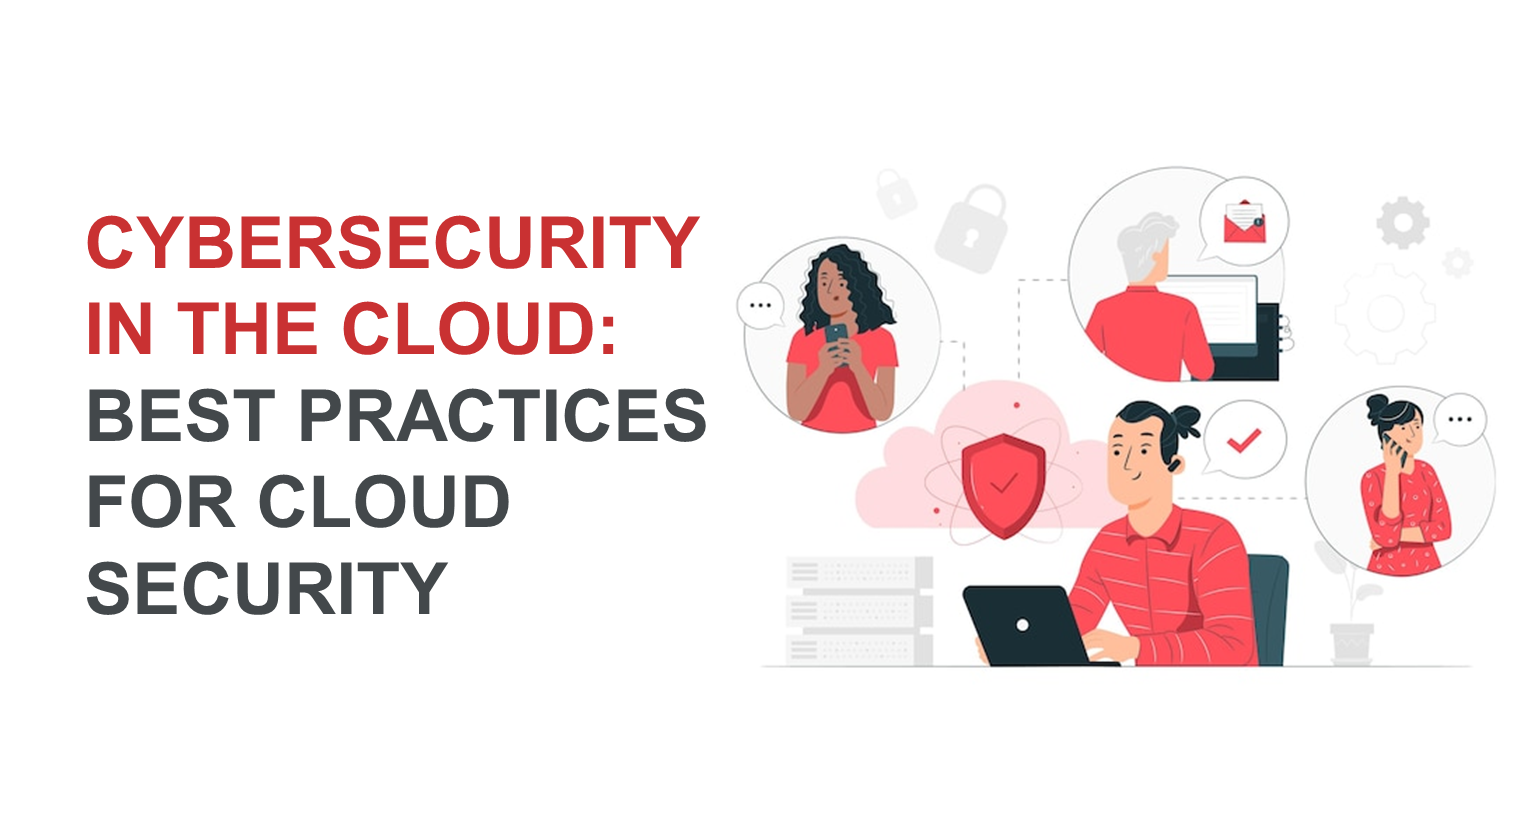 Cybersecurity in the Cloud: Best Practices for Cloud Security